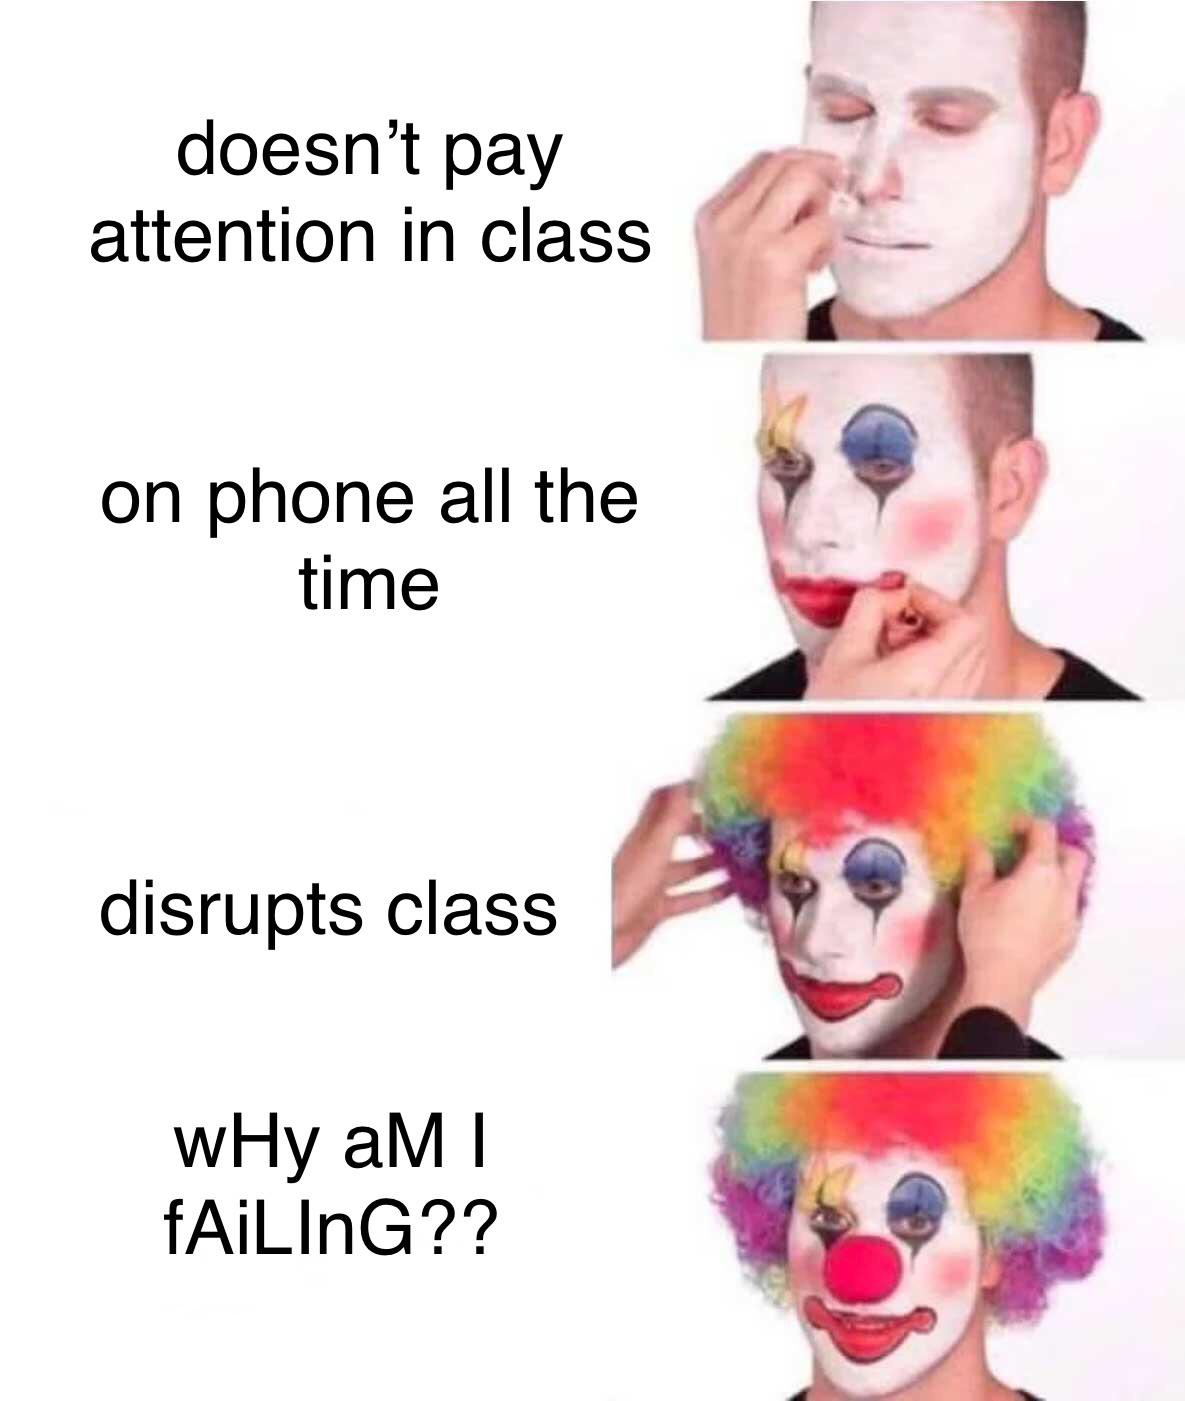 funny memes - dank memes tudor memes - doesn't pay attention in class on phone all the time disrupts class wHy aMI fAiLING??